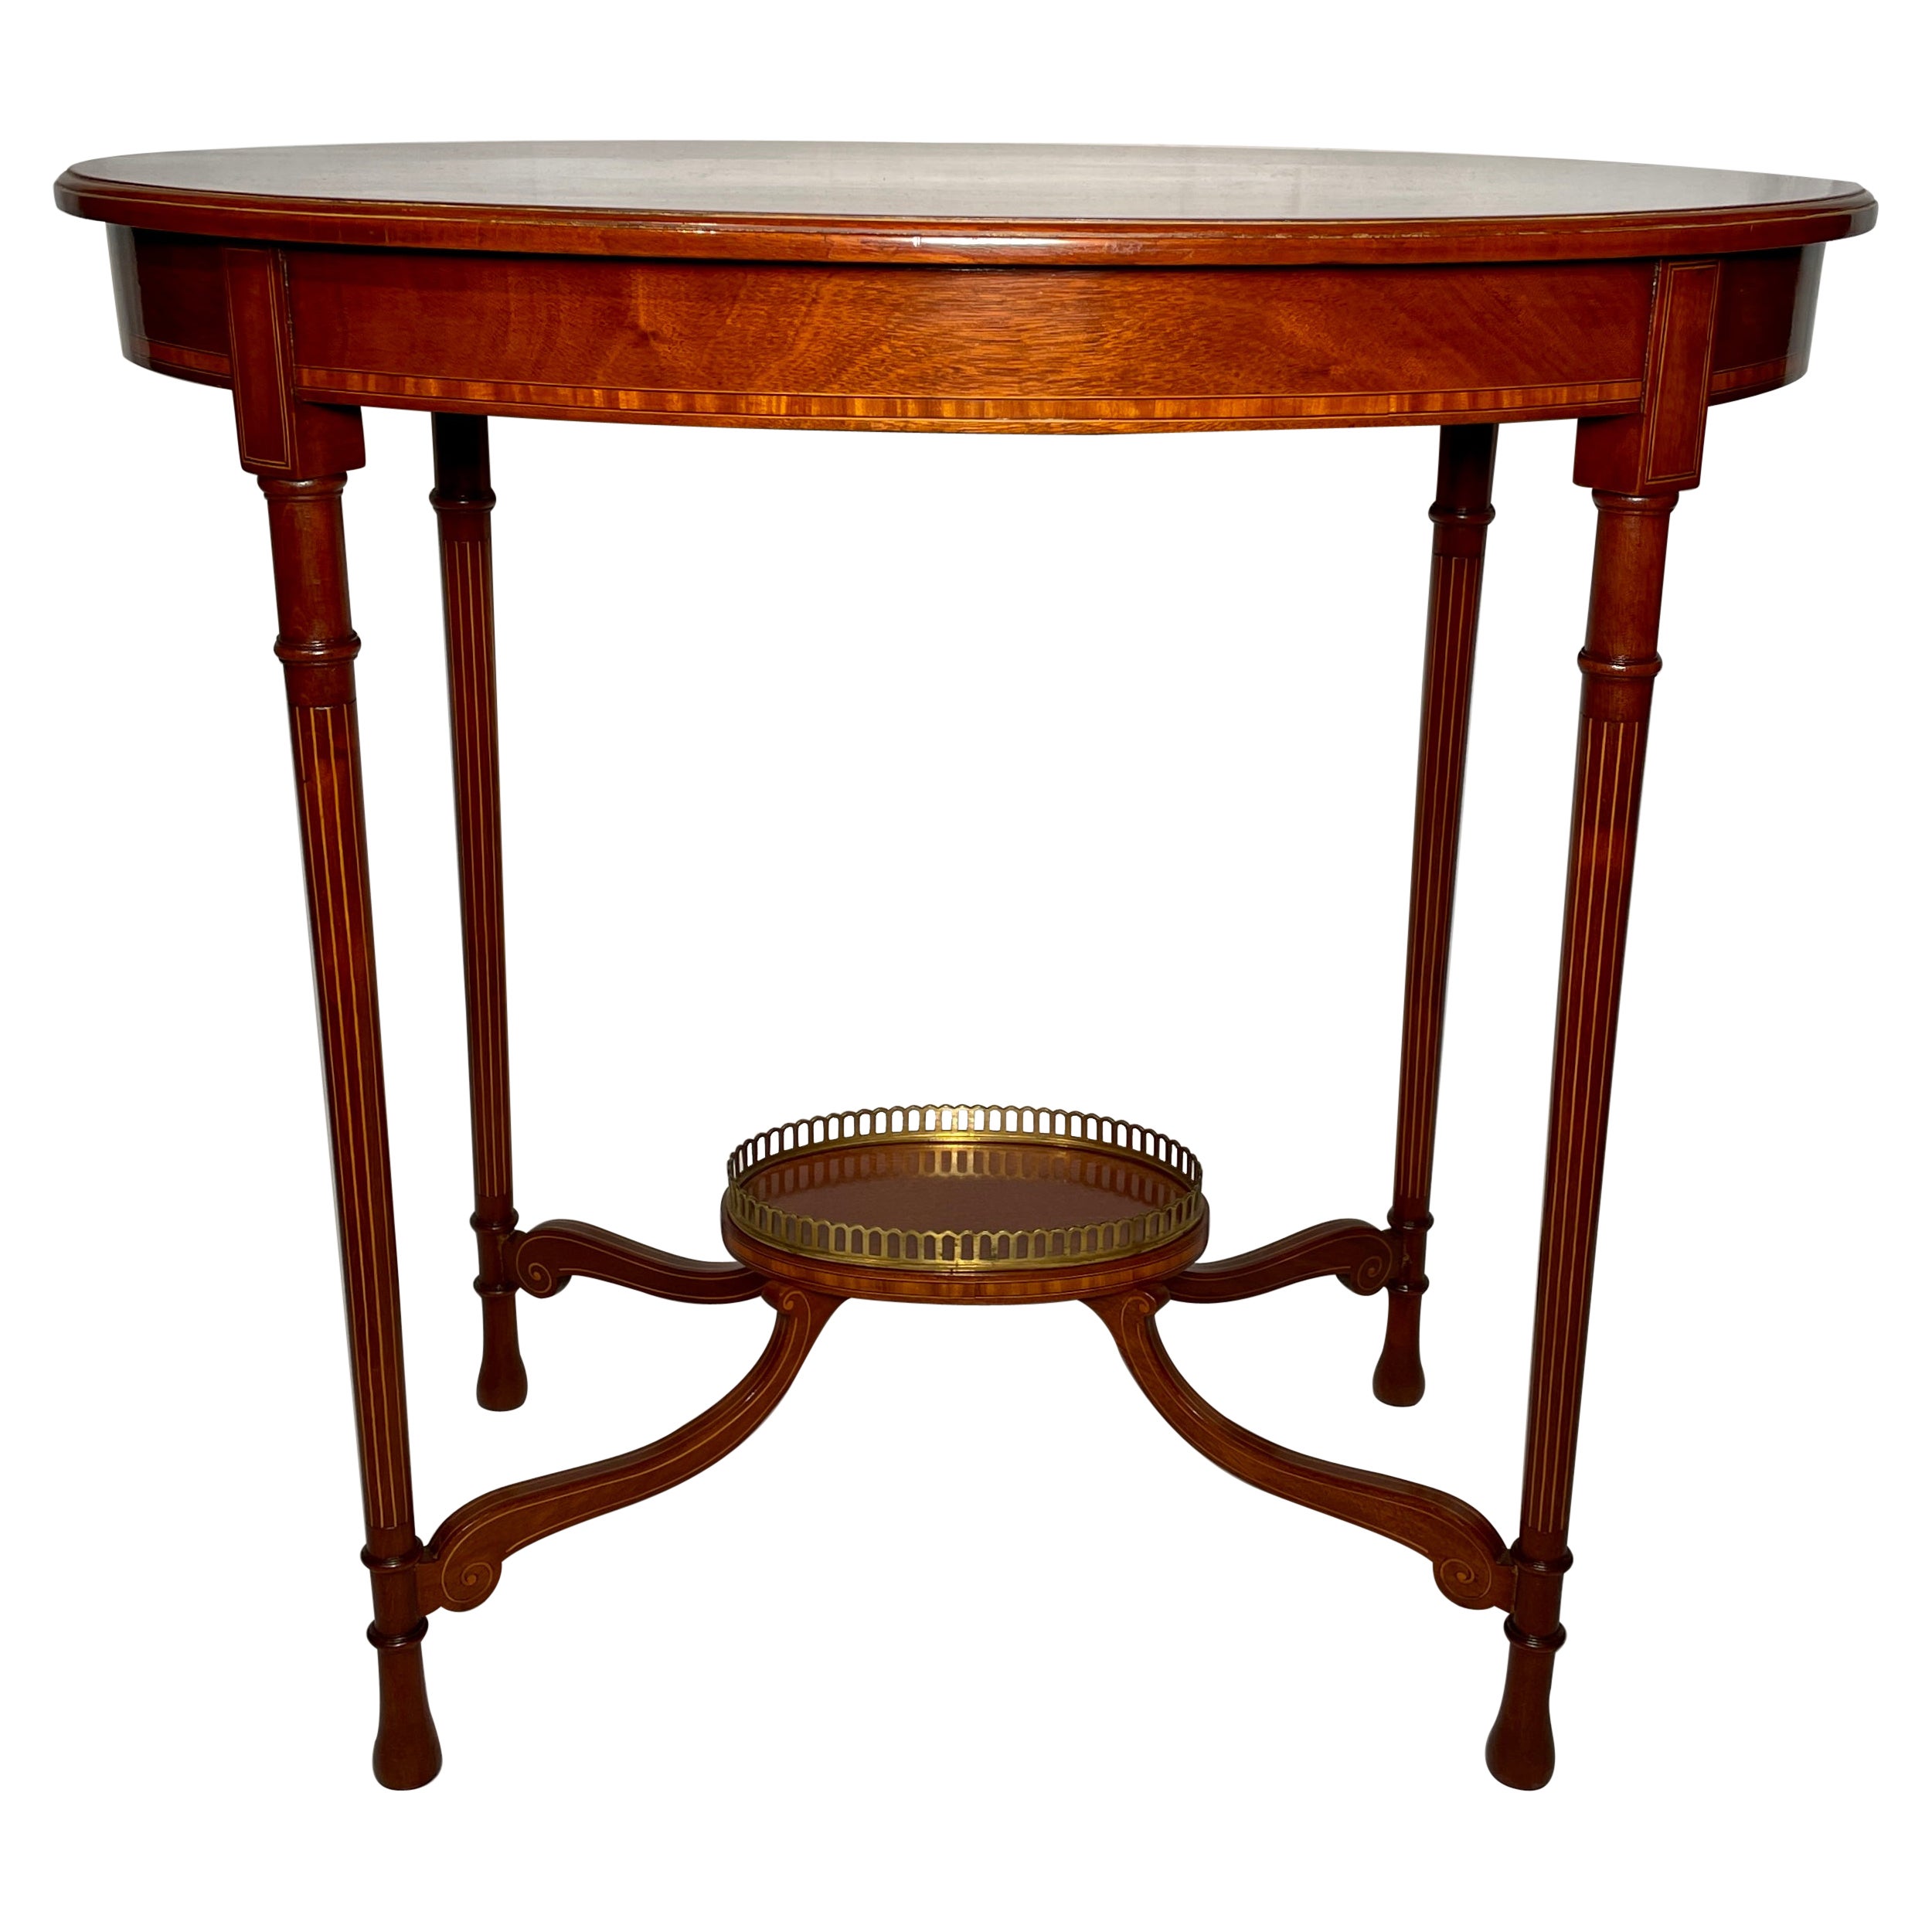 Antique Late 19th Century English Mahogany Oval Table with Inlay.